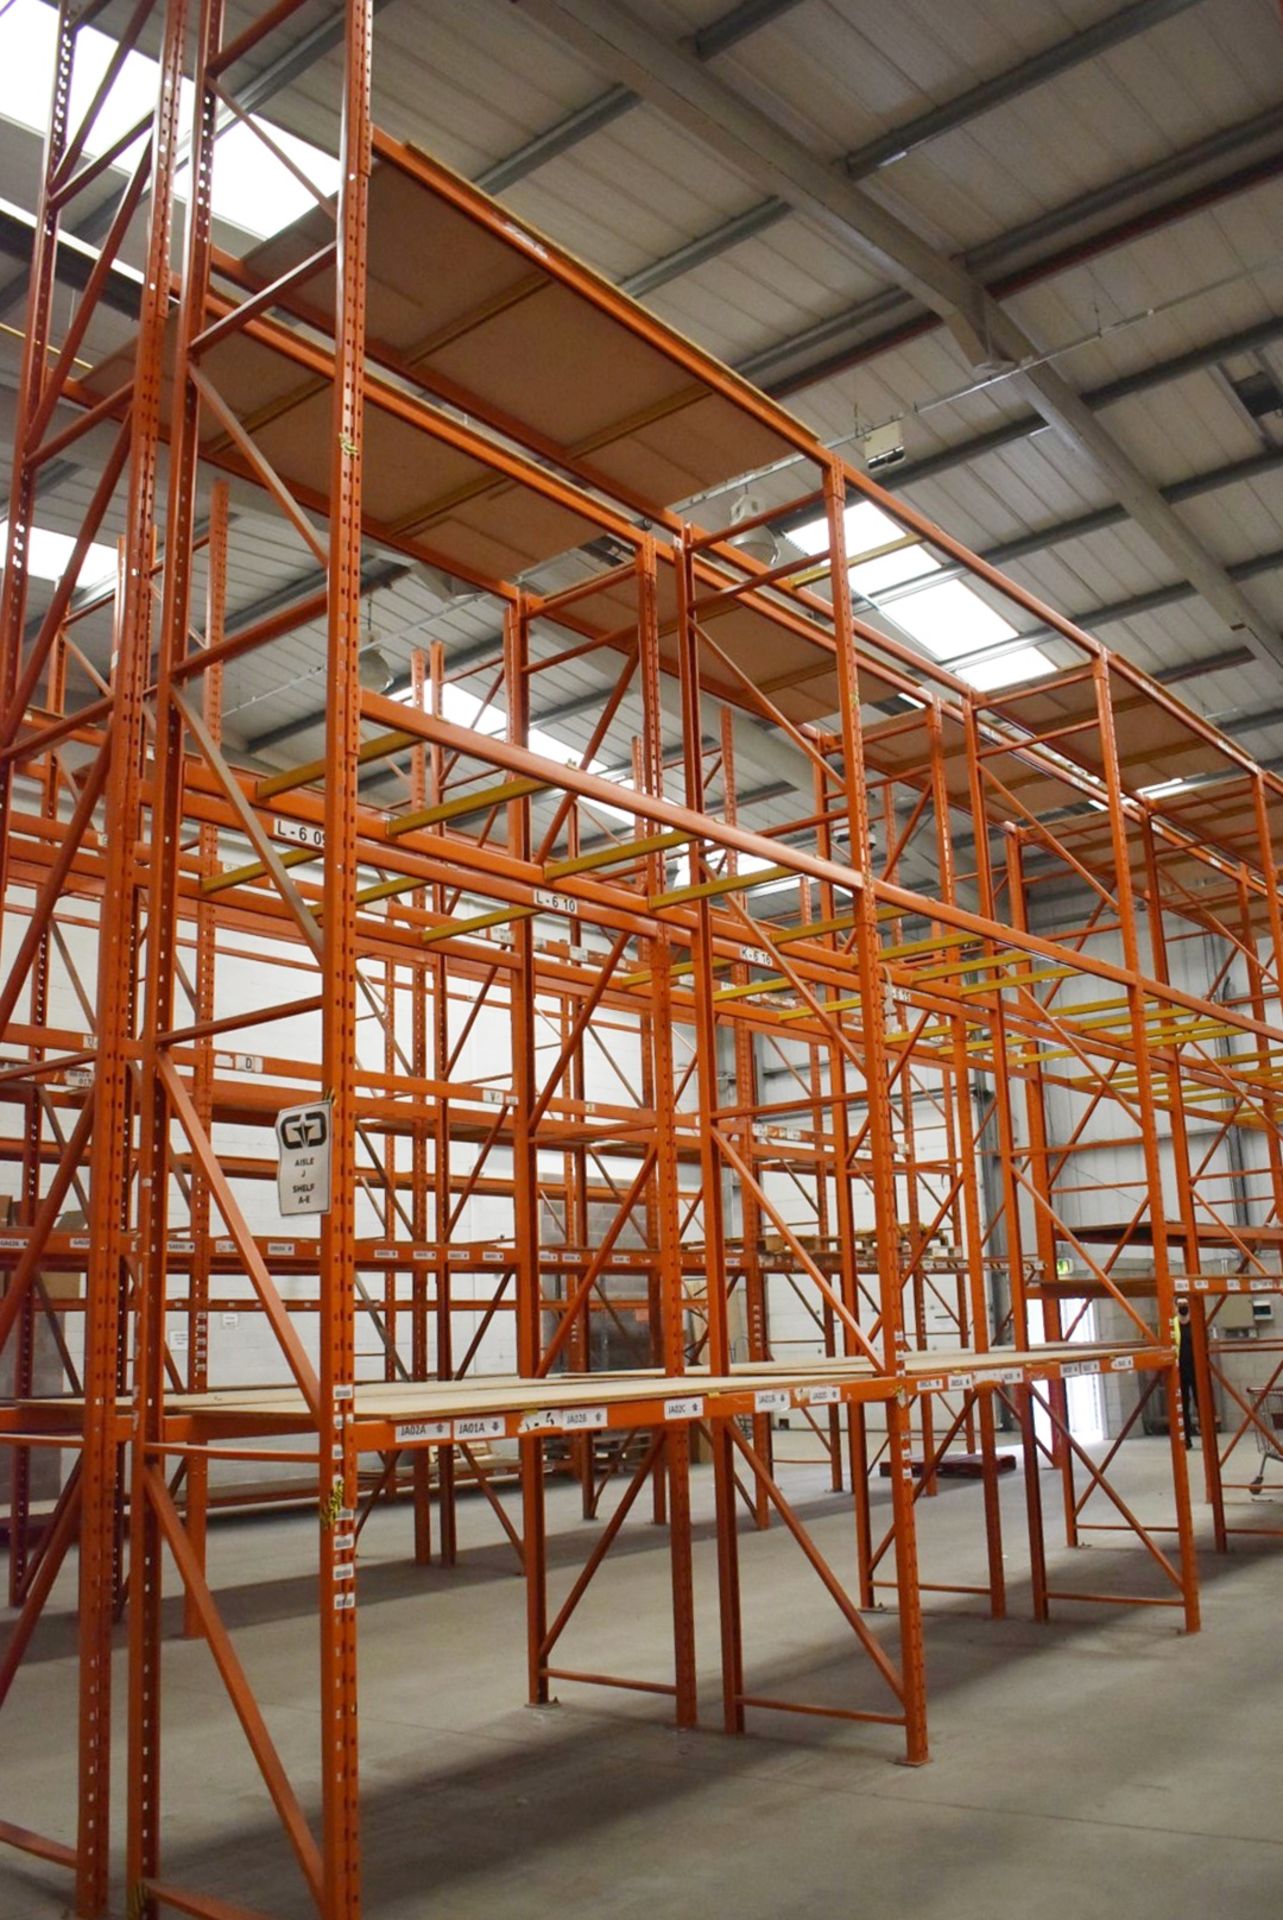 5 x Bays of RediRack Warehouse Pallet Racking - Lot Includes 6 x Uprights and 30 x Crossbeams - - Image 3 of 5